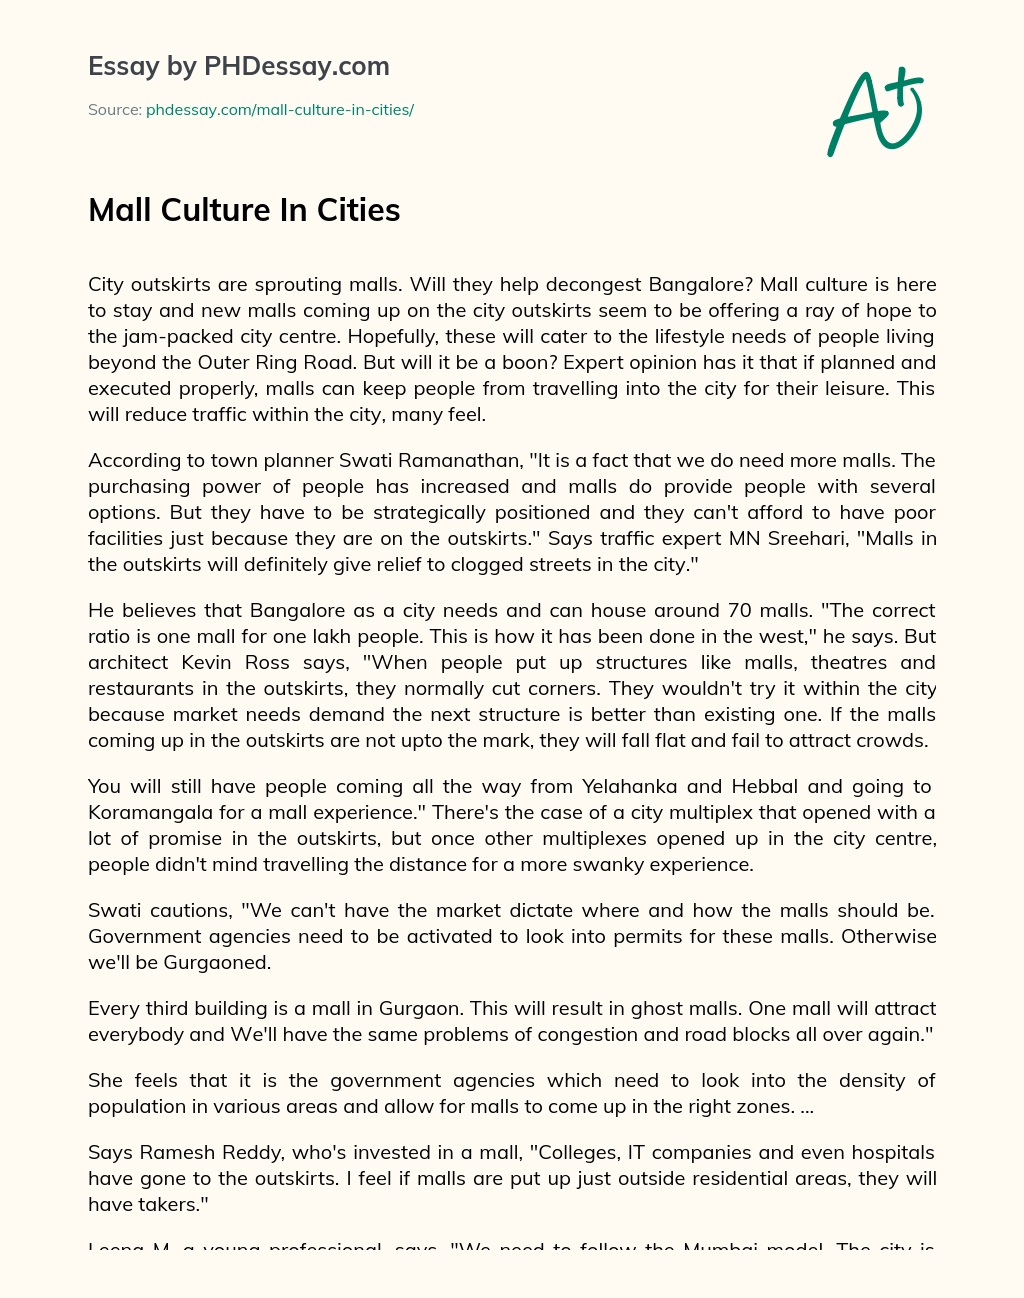 Mall Culture In Cities essay